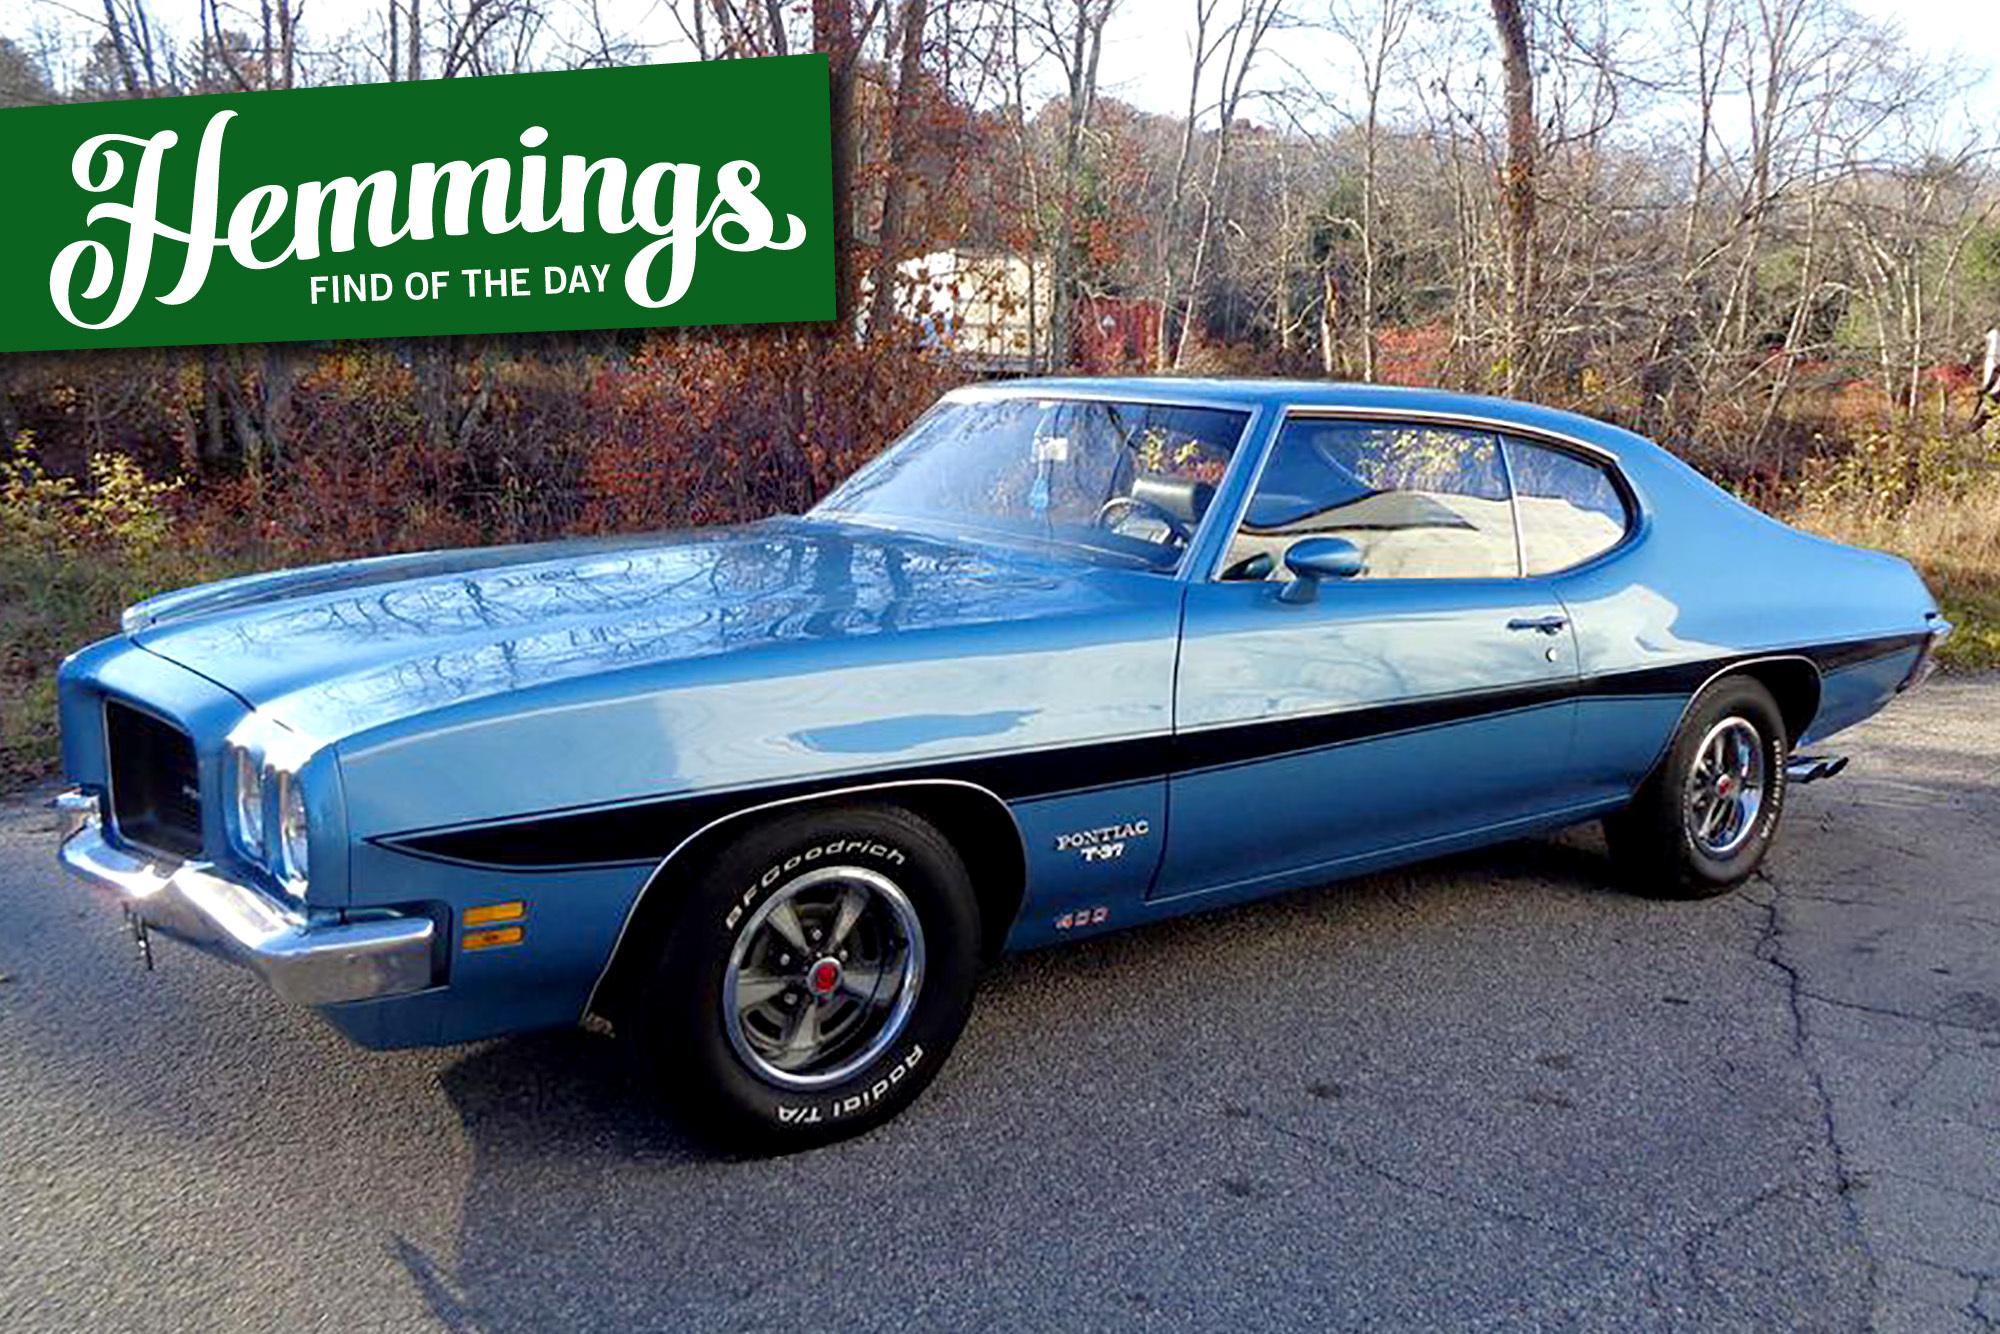 New paint and stripes are all this 1971 Pontiac T-37 needed for a fresh look at a budget performance car